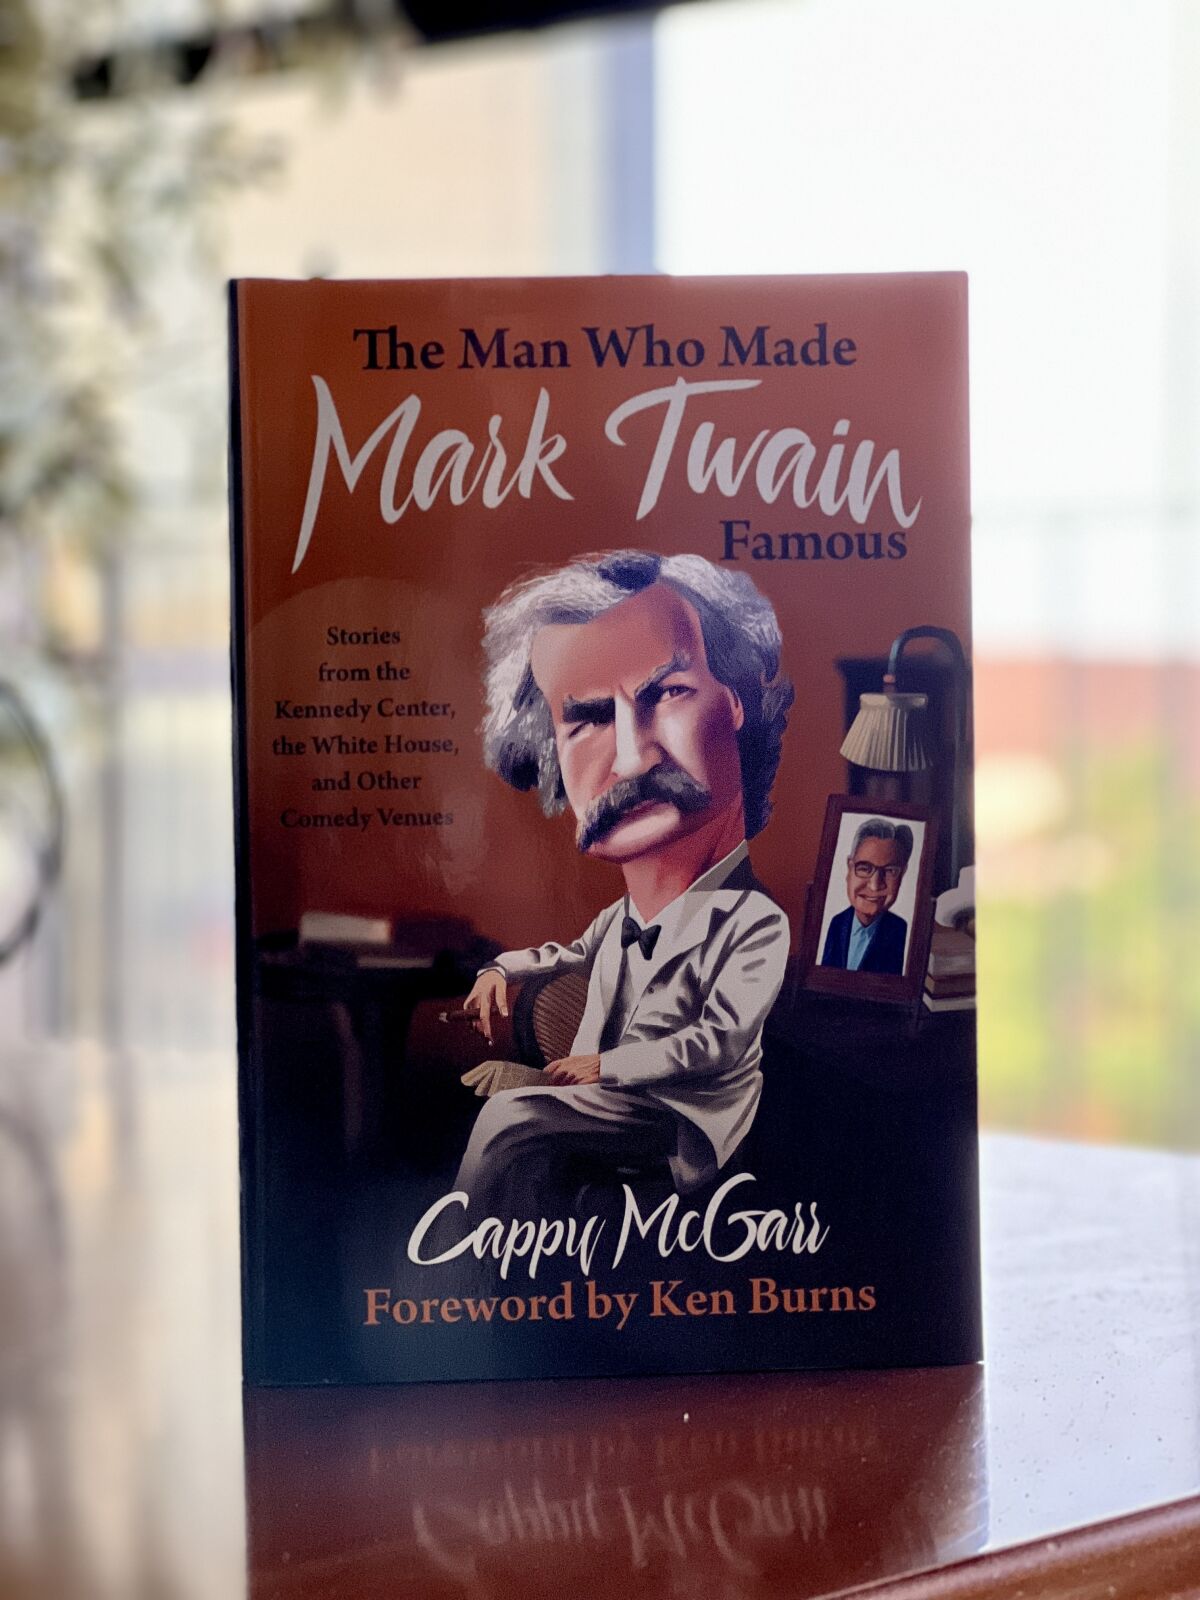 "The Man Who Made Mark Twain Famous" details Cappy McGarr's involvement in national politics, among other stories.